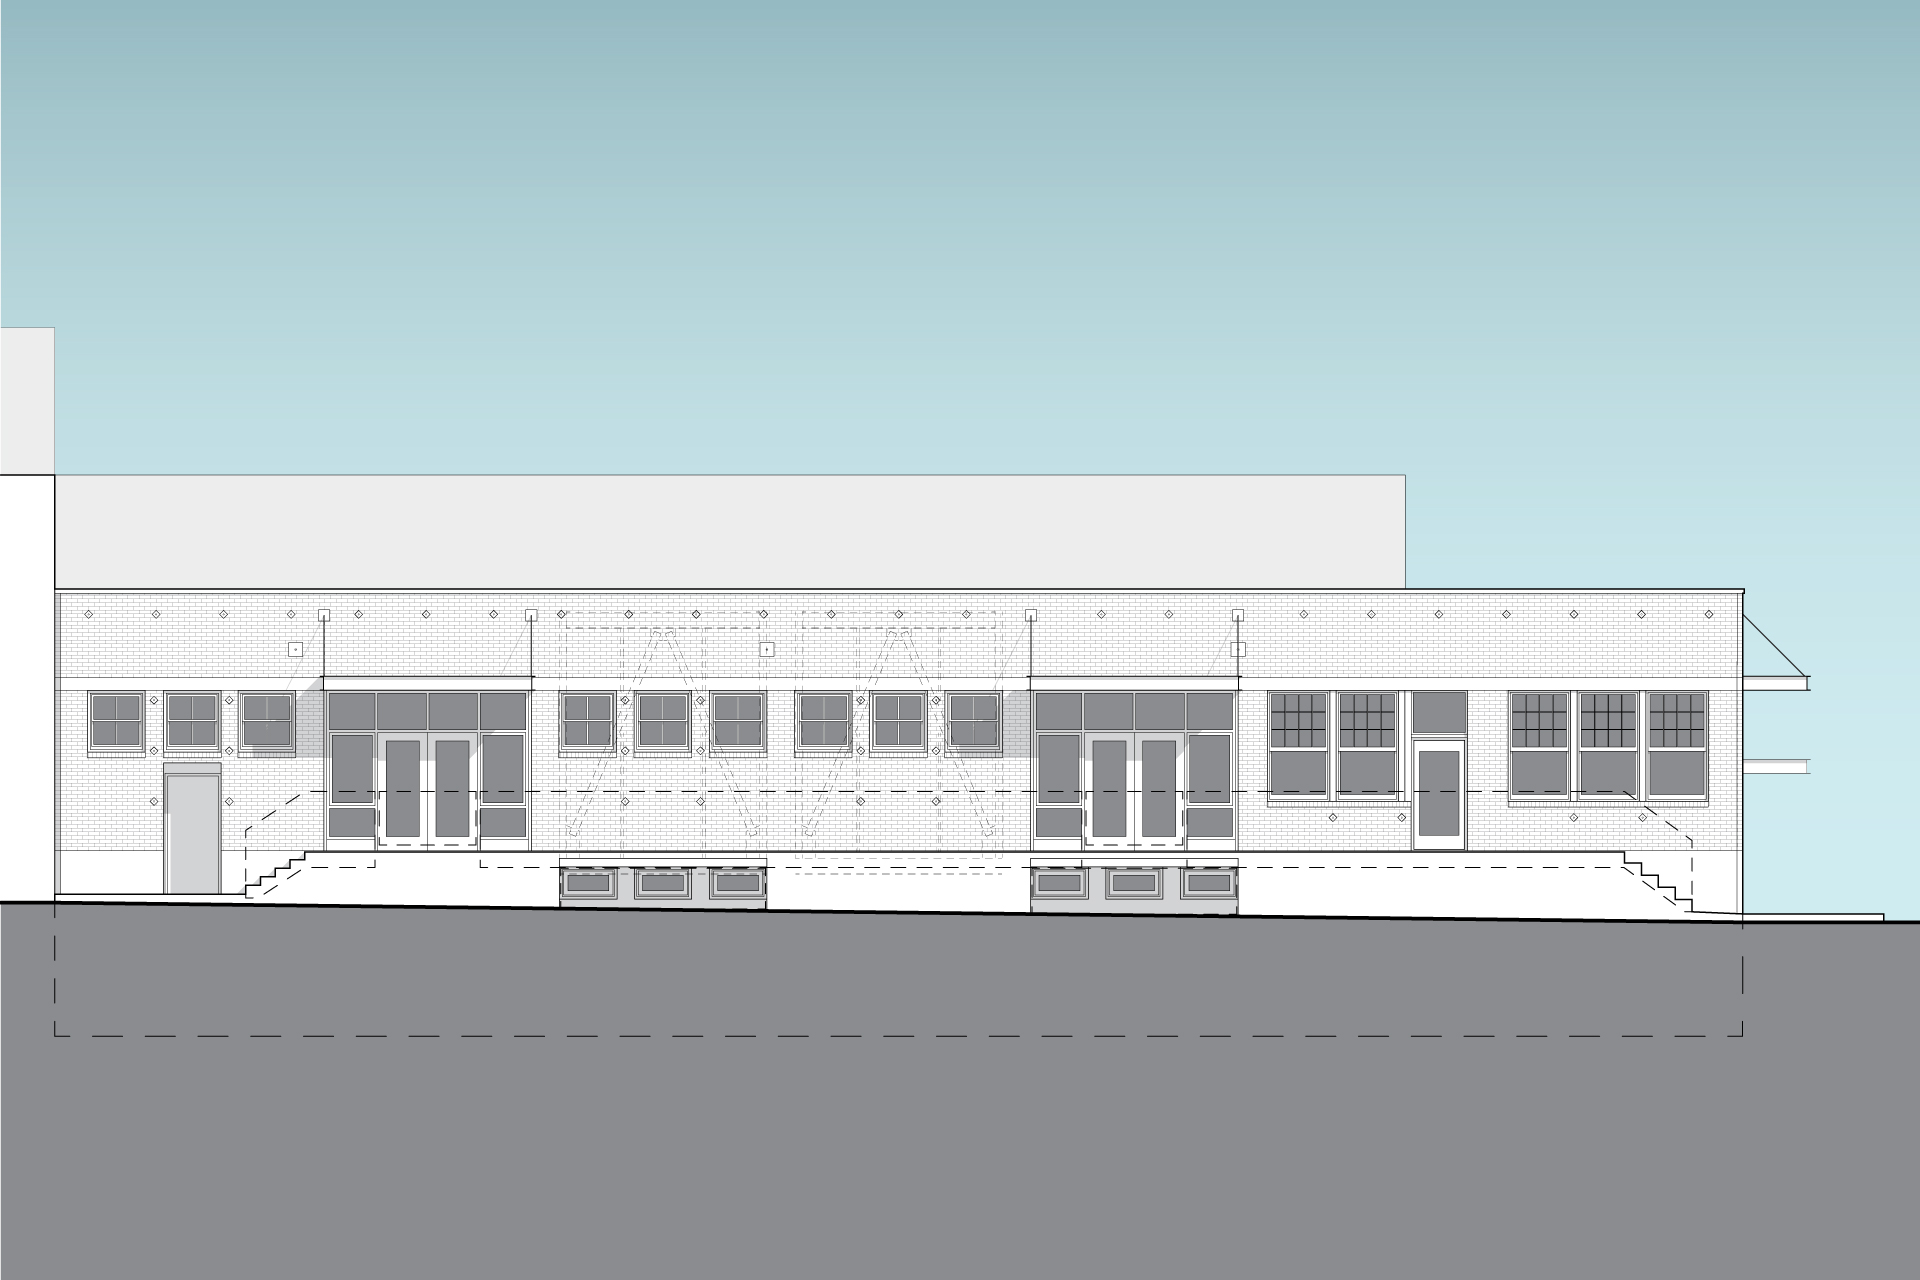 This is a drawing of the east elevation of the Taylor Building after renovations.